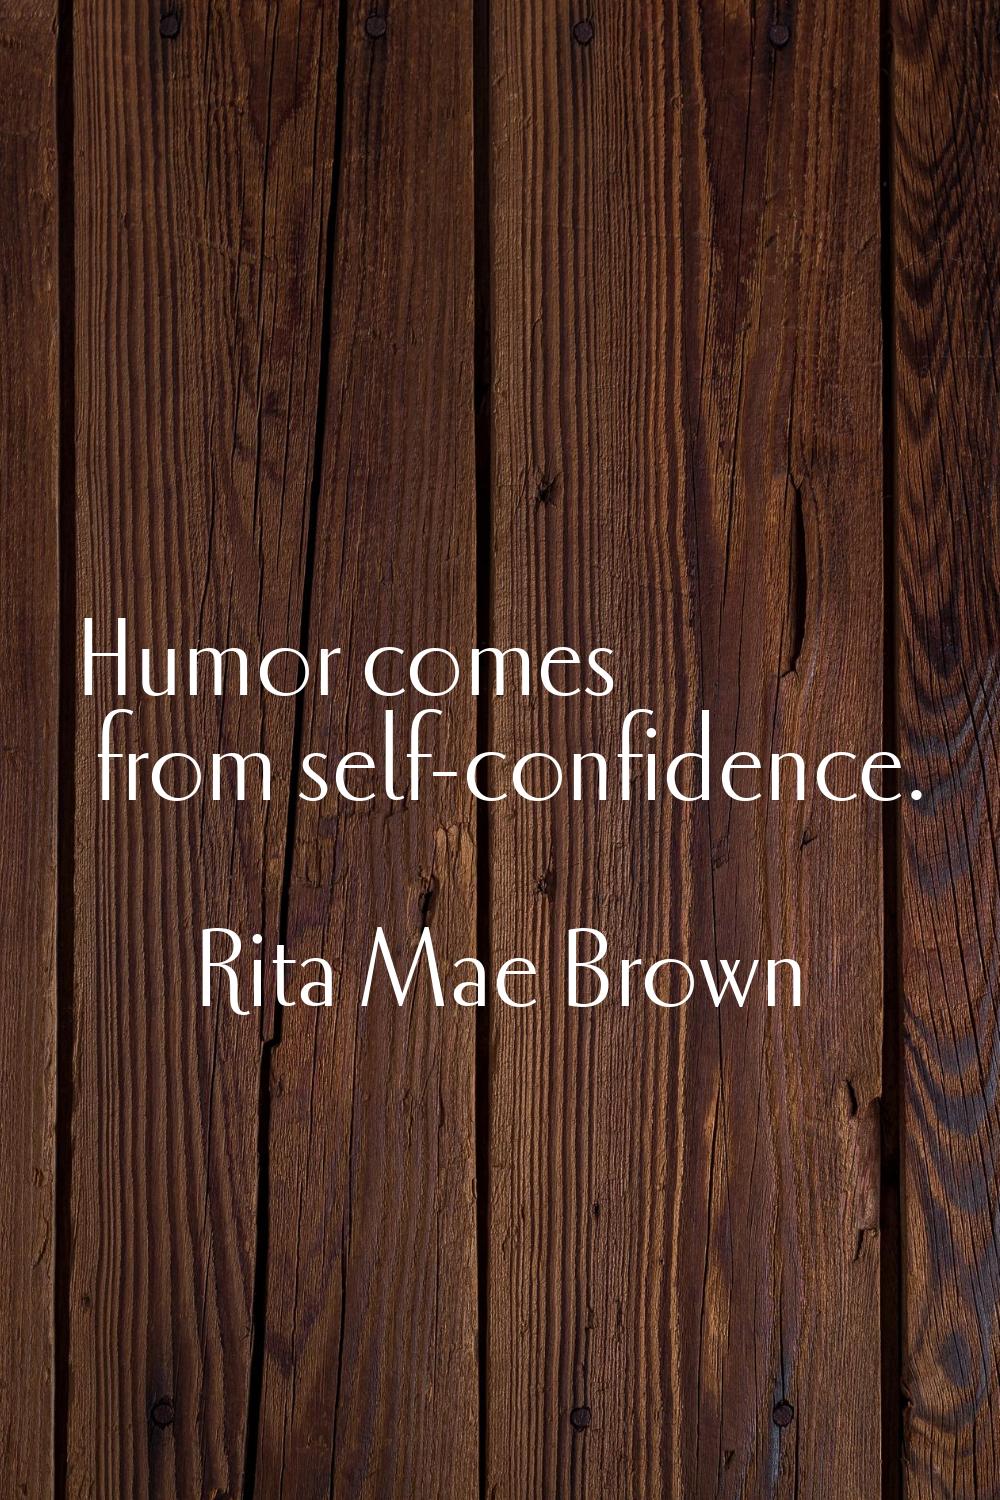 Humor comes from self-confidence.